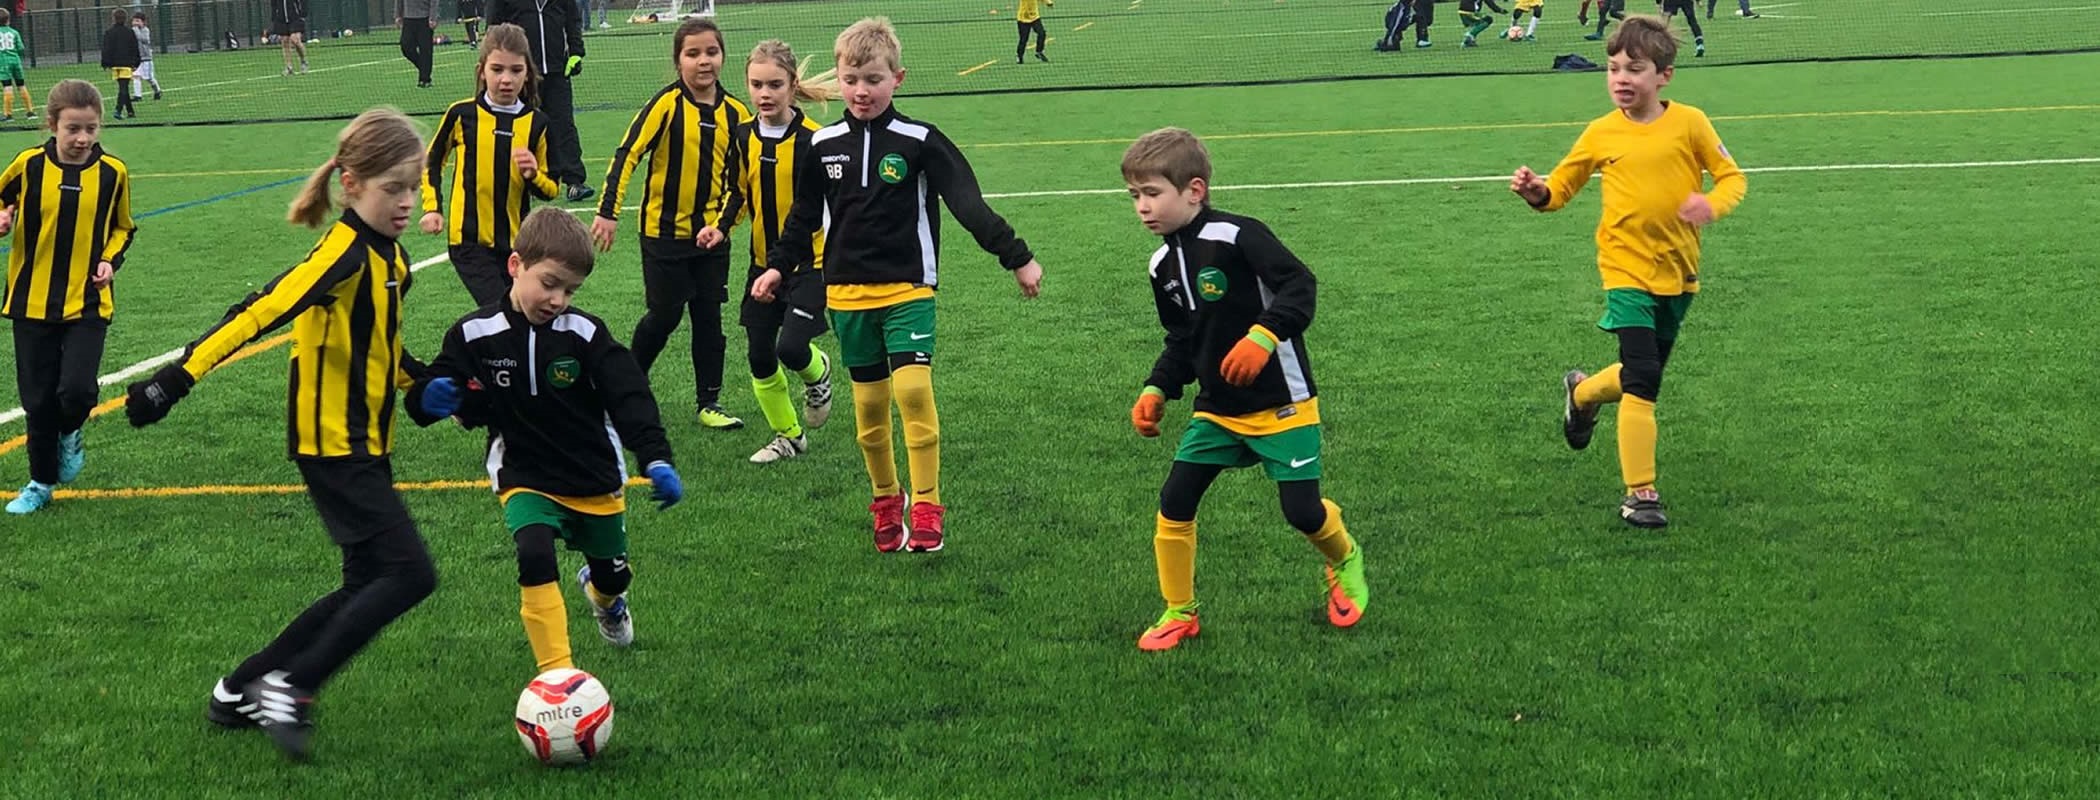 Mini Soccer - ...For 4 to 10 Year Old Future Stars